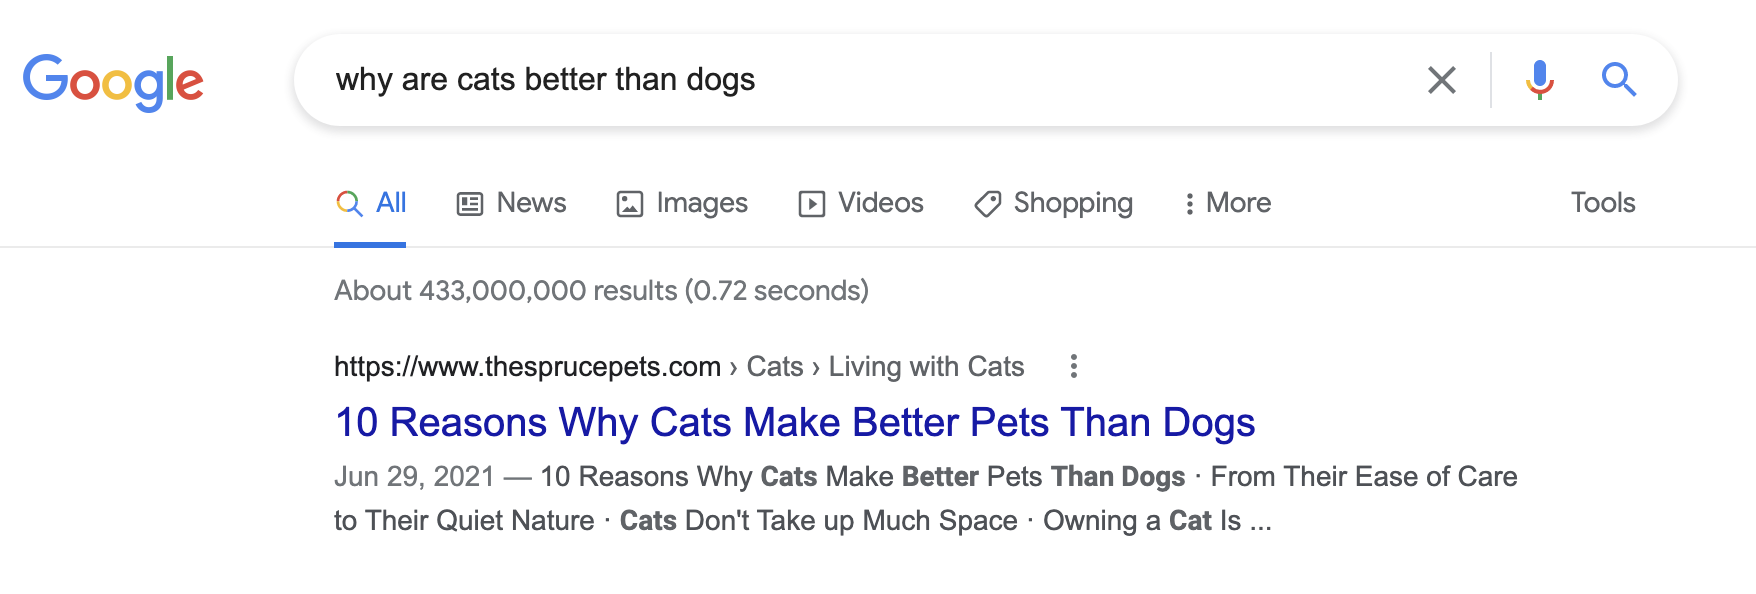 Google search results for why are cats better than dogs